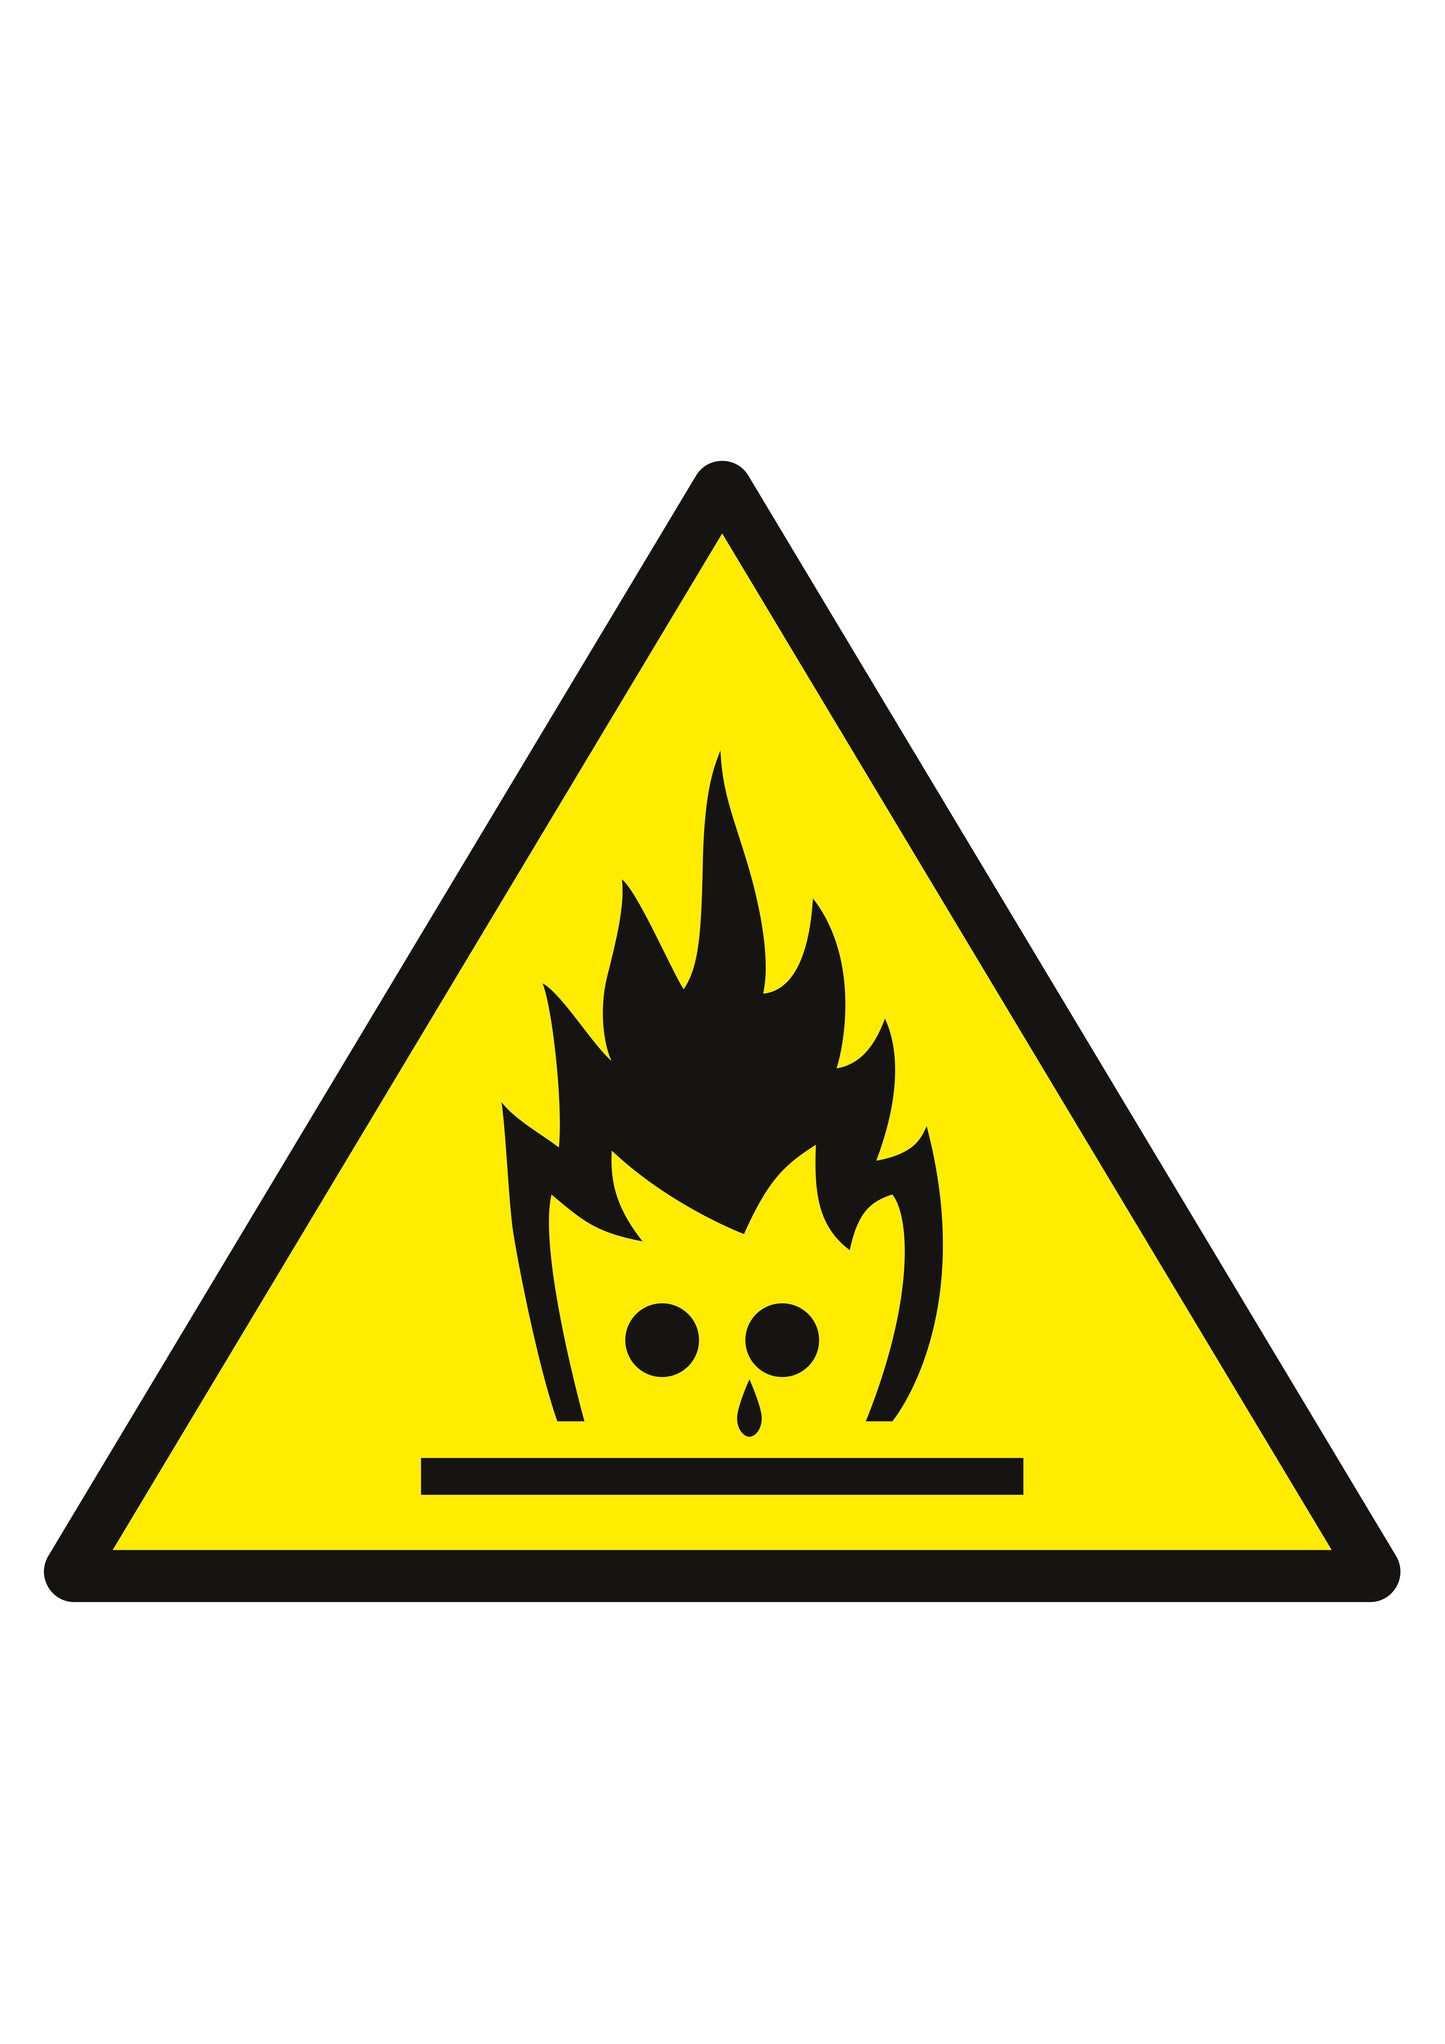 WARNING: Risk of Fire Pictogram by THIS AIN'T ROCK 'N' ROLL